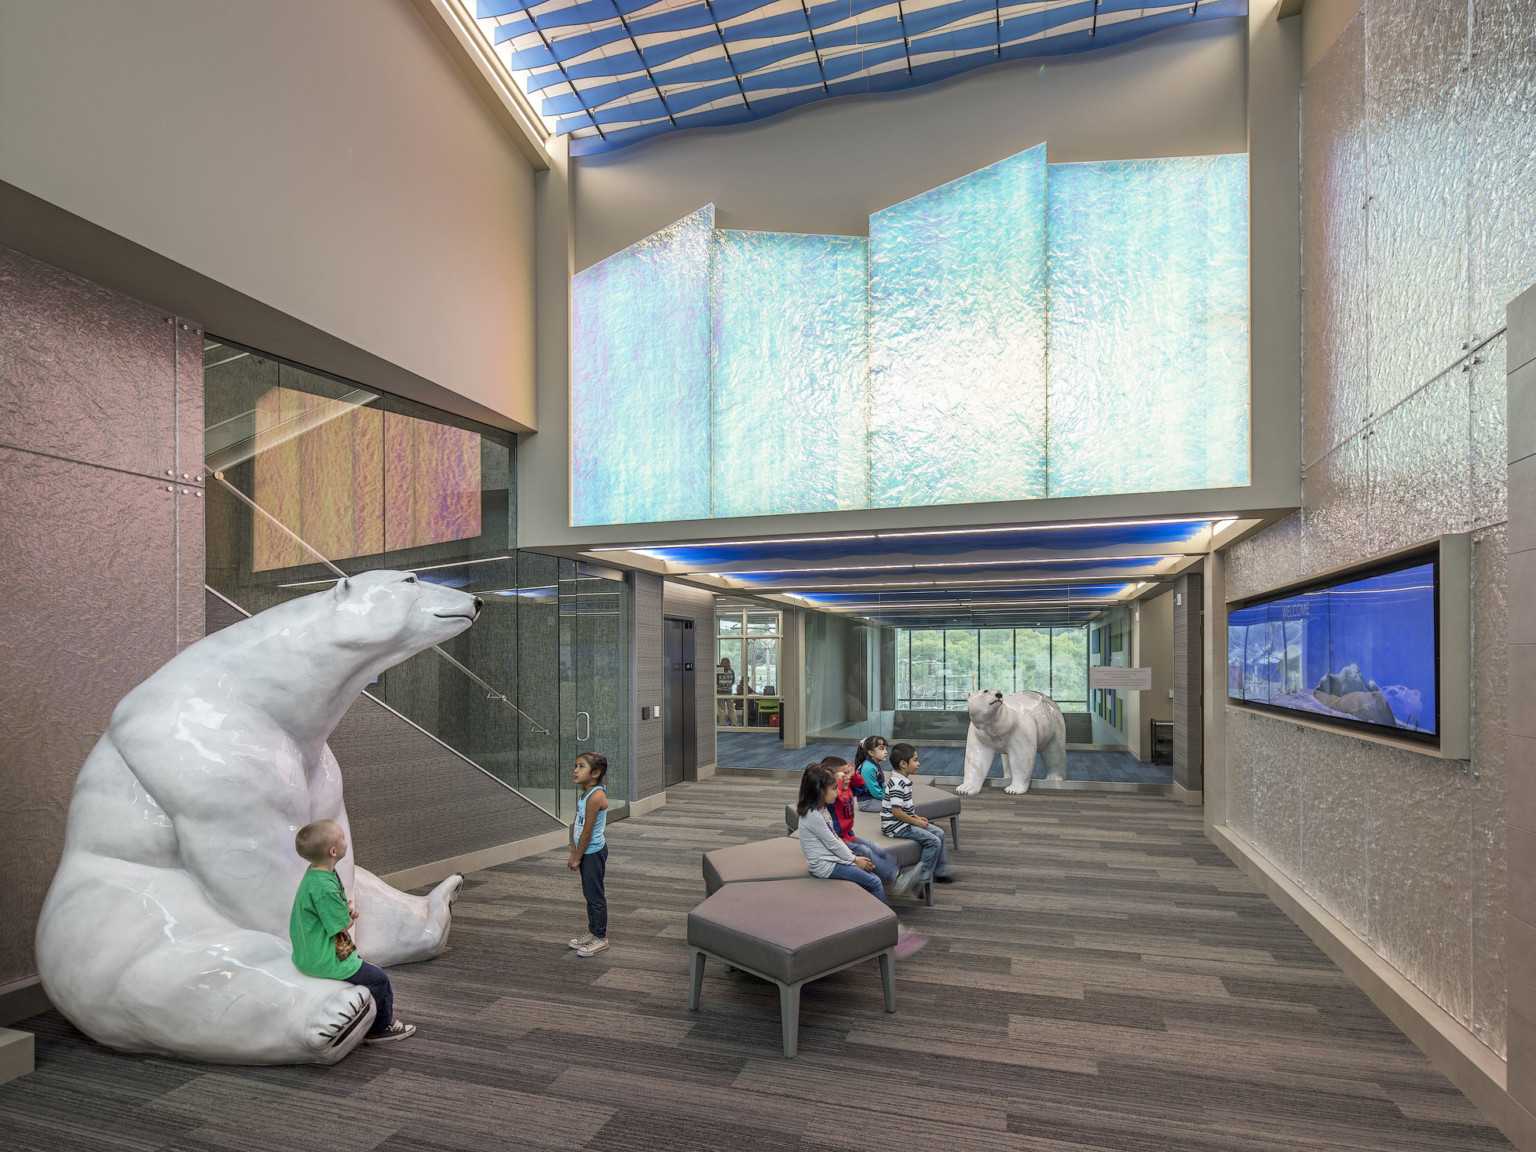 Large polar bear sculptures in a double height to drop ceiling hallway. In drop wall are 4 ice like iridescent angled panels